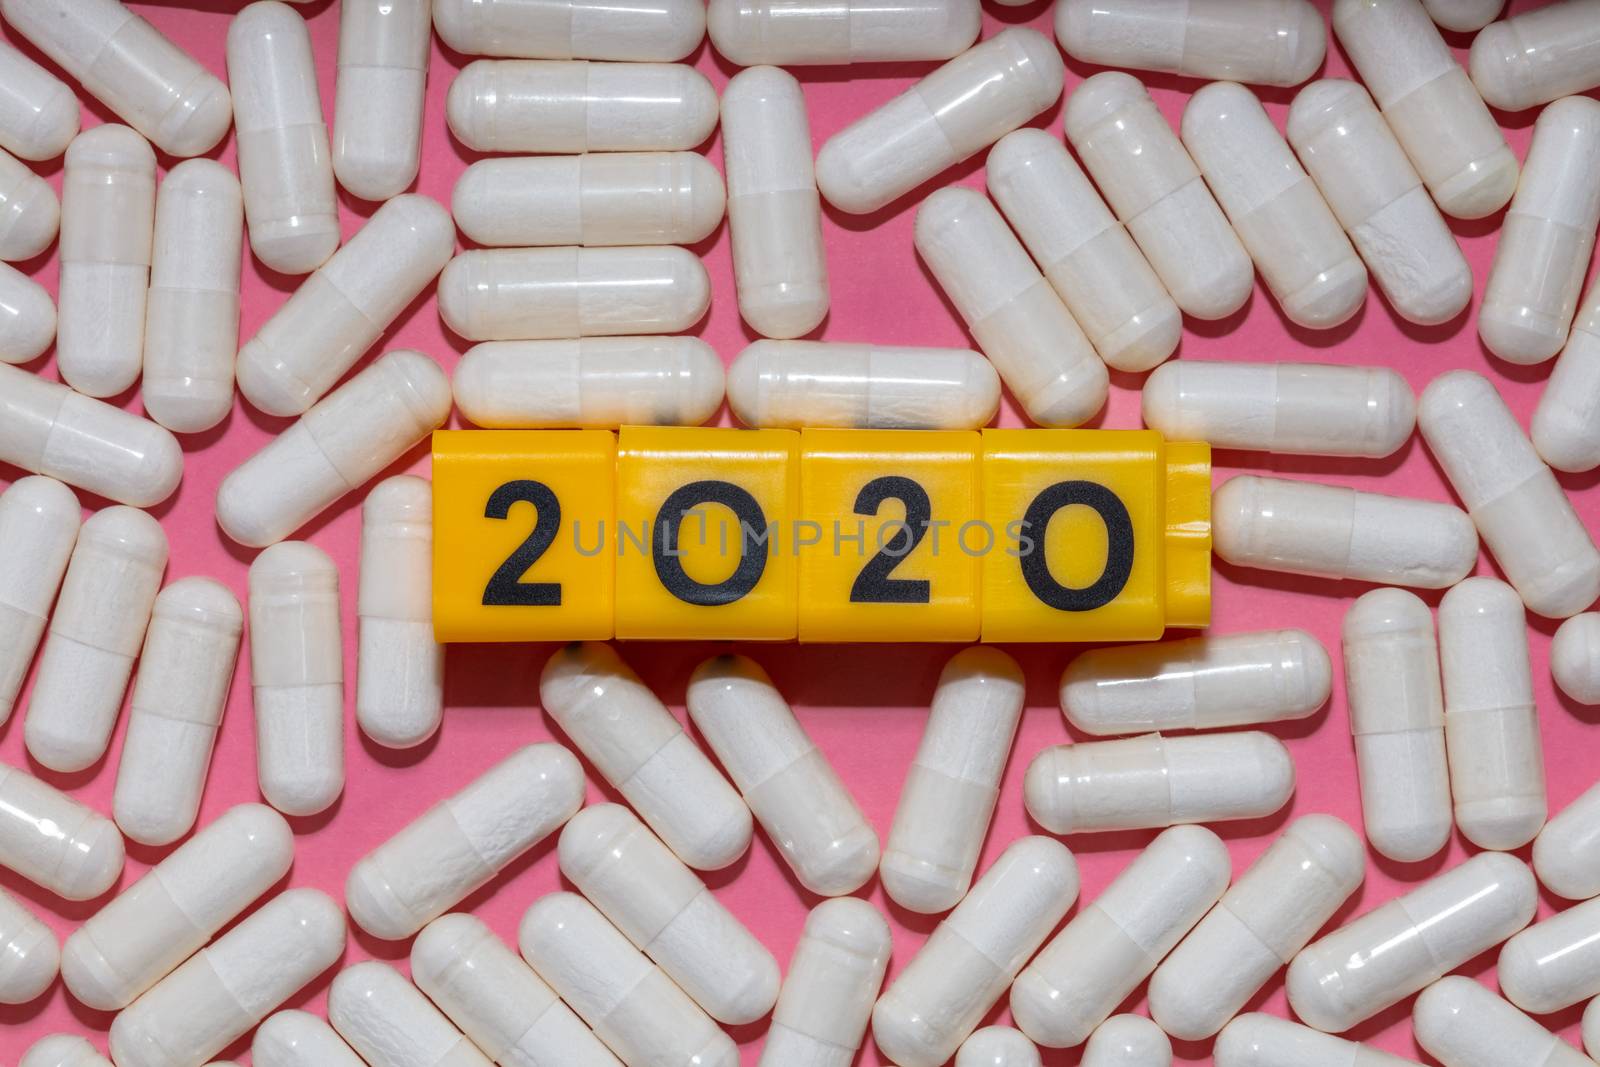 Top close up shot of white pills surrounding yellow cubes with black digits which form 2020 year. Pink background. Healthcare, medical and pharmaceutical concept. New normal and reality concept